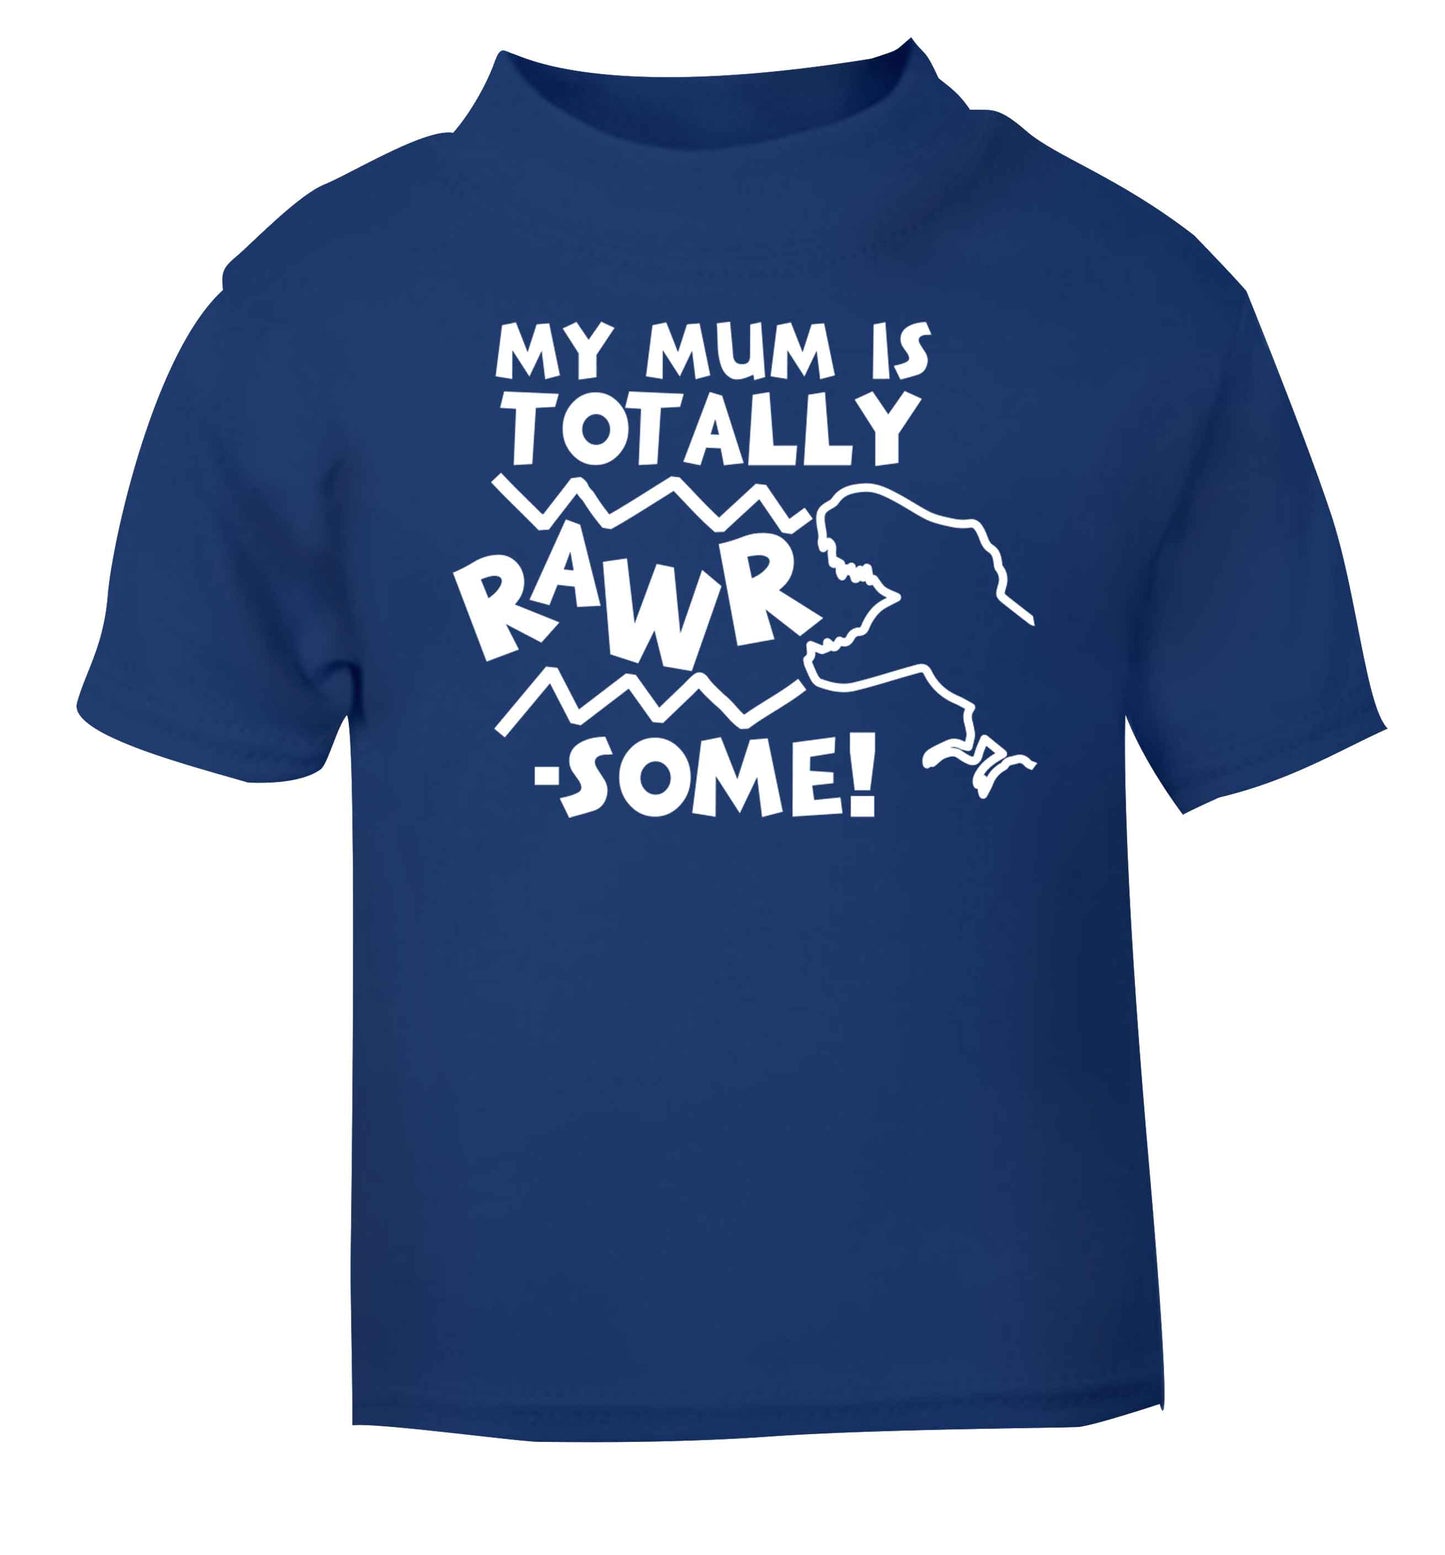 My mum is totally rawrsome blue baby toddler Tshirt 2 Years